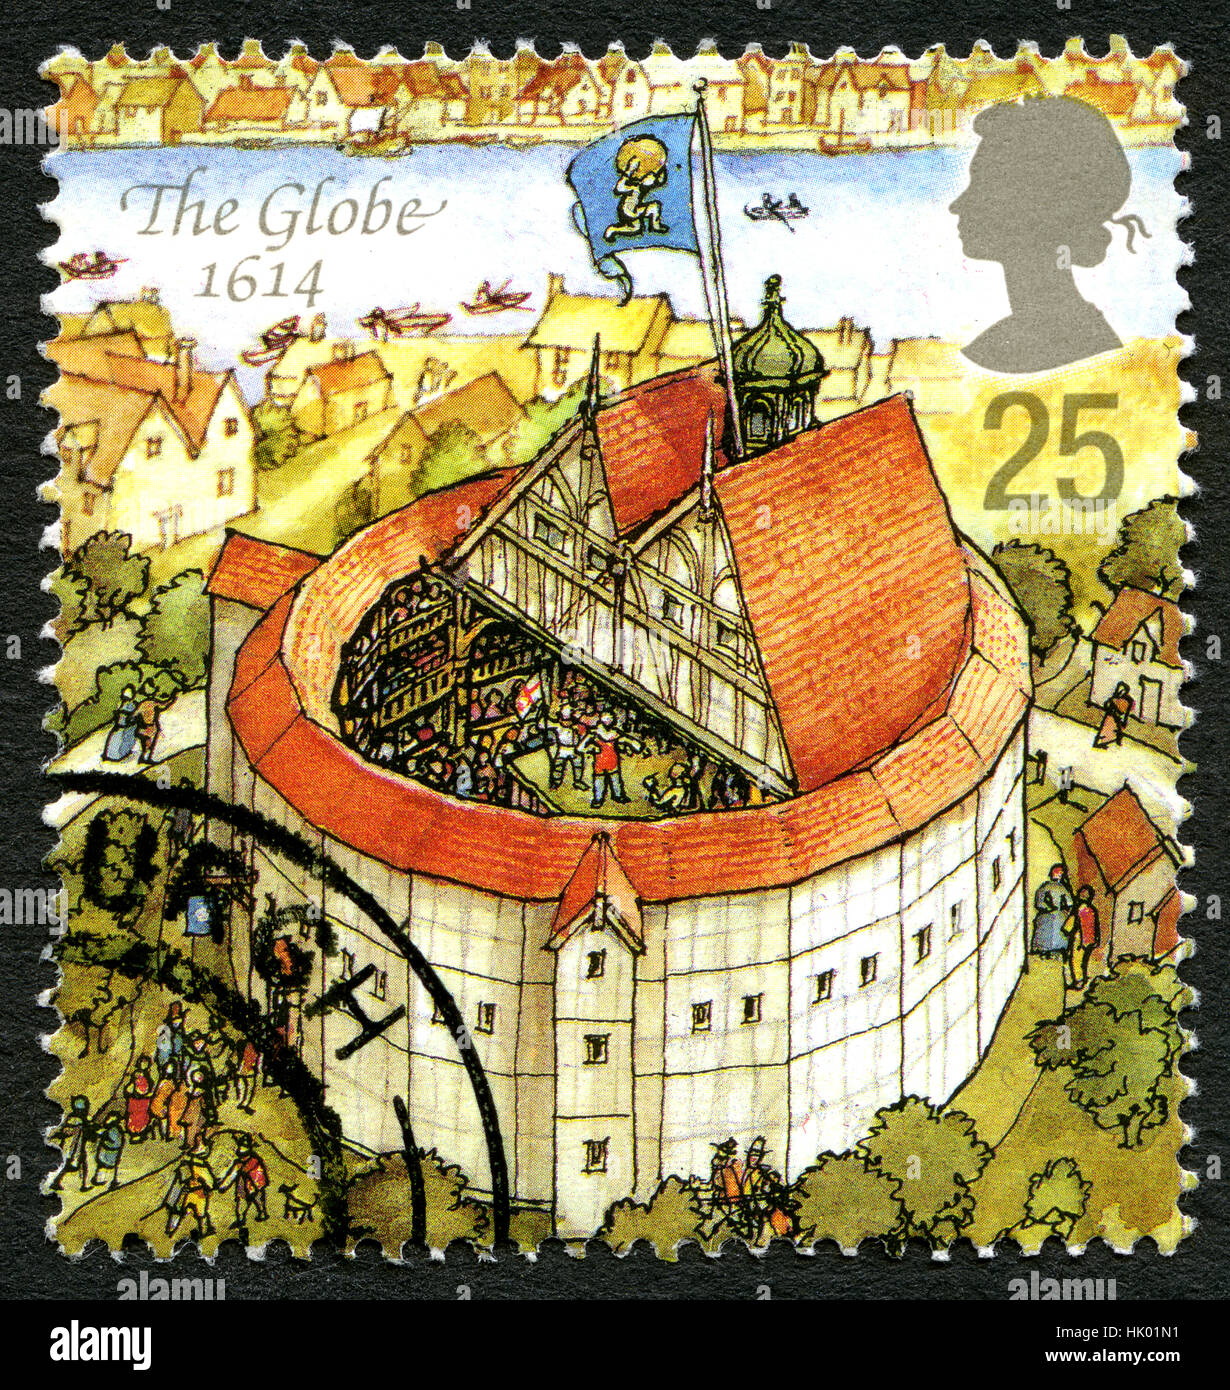 GREAT BRITAIN - CIRCA 1995: A used postage stamp from the UK, depicting an illustration of The Globe theatre in London in 1614, circa 1995. Stock Photo